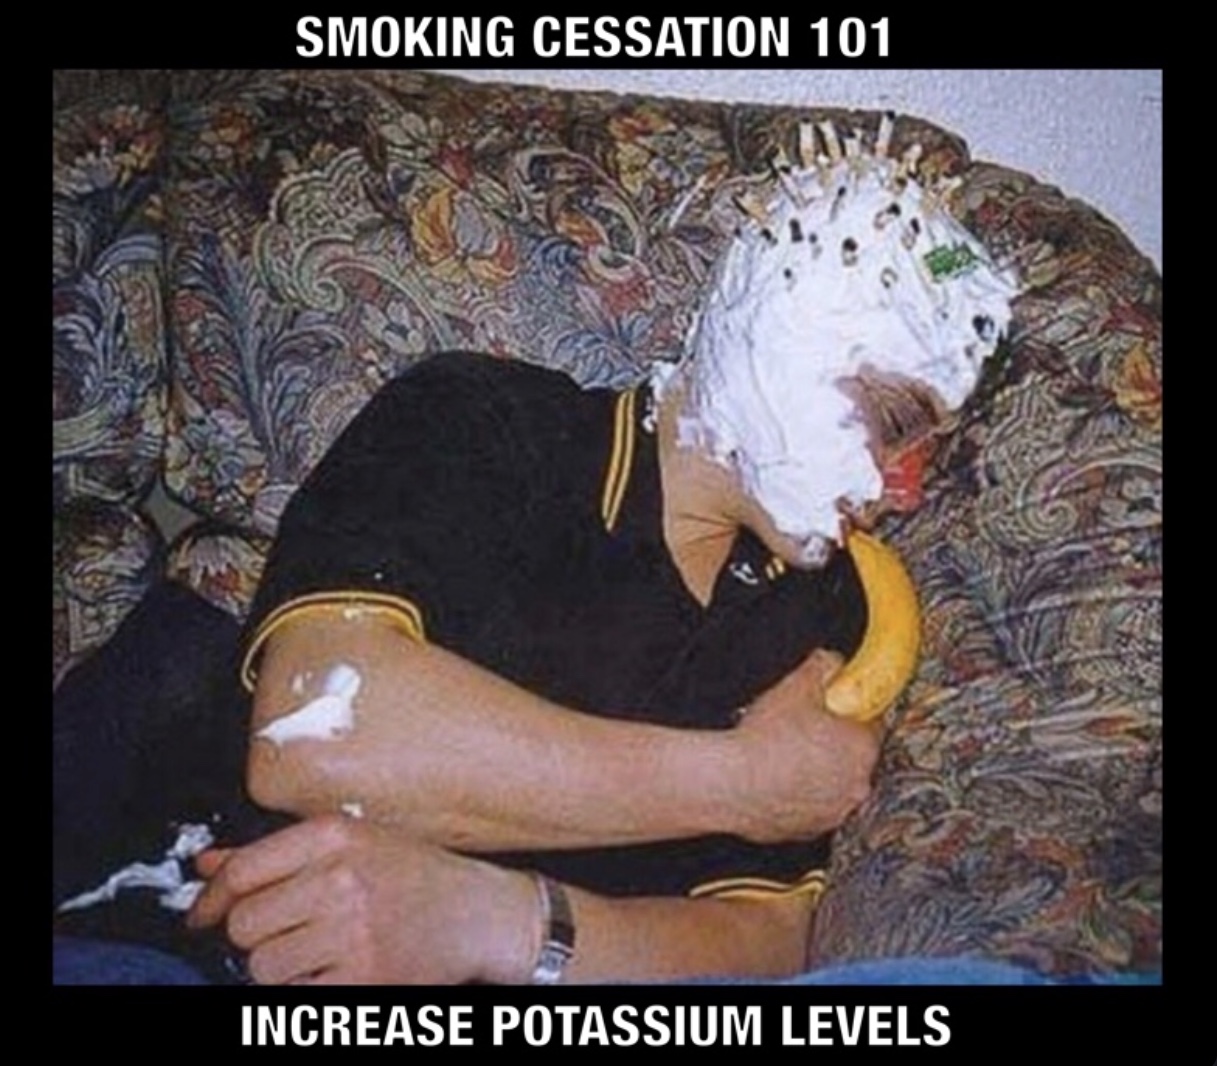 drunk passed out people - Smoking Cessation 101 Increase Potassium Levels